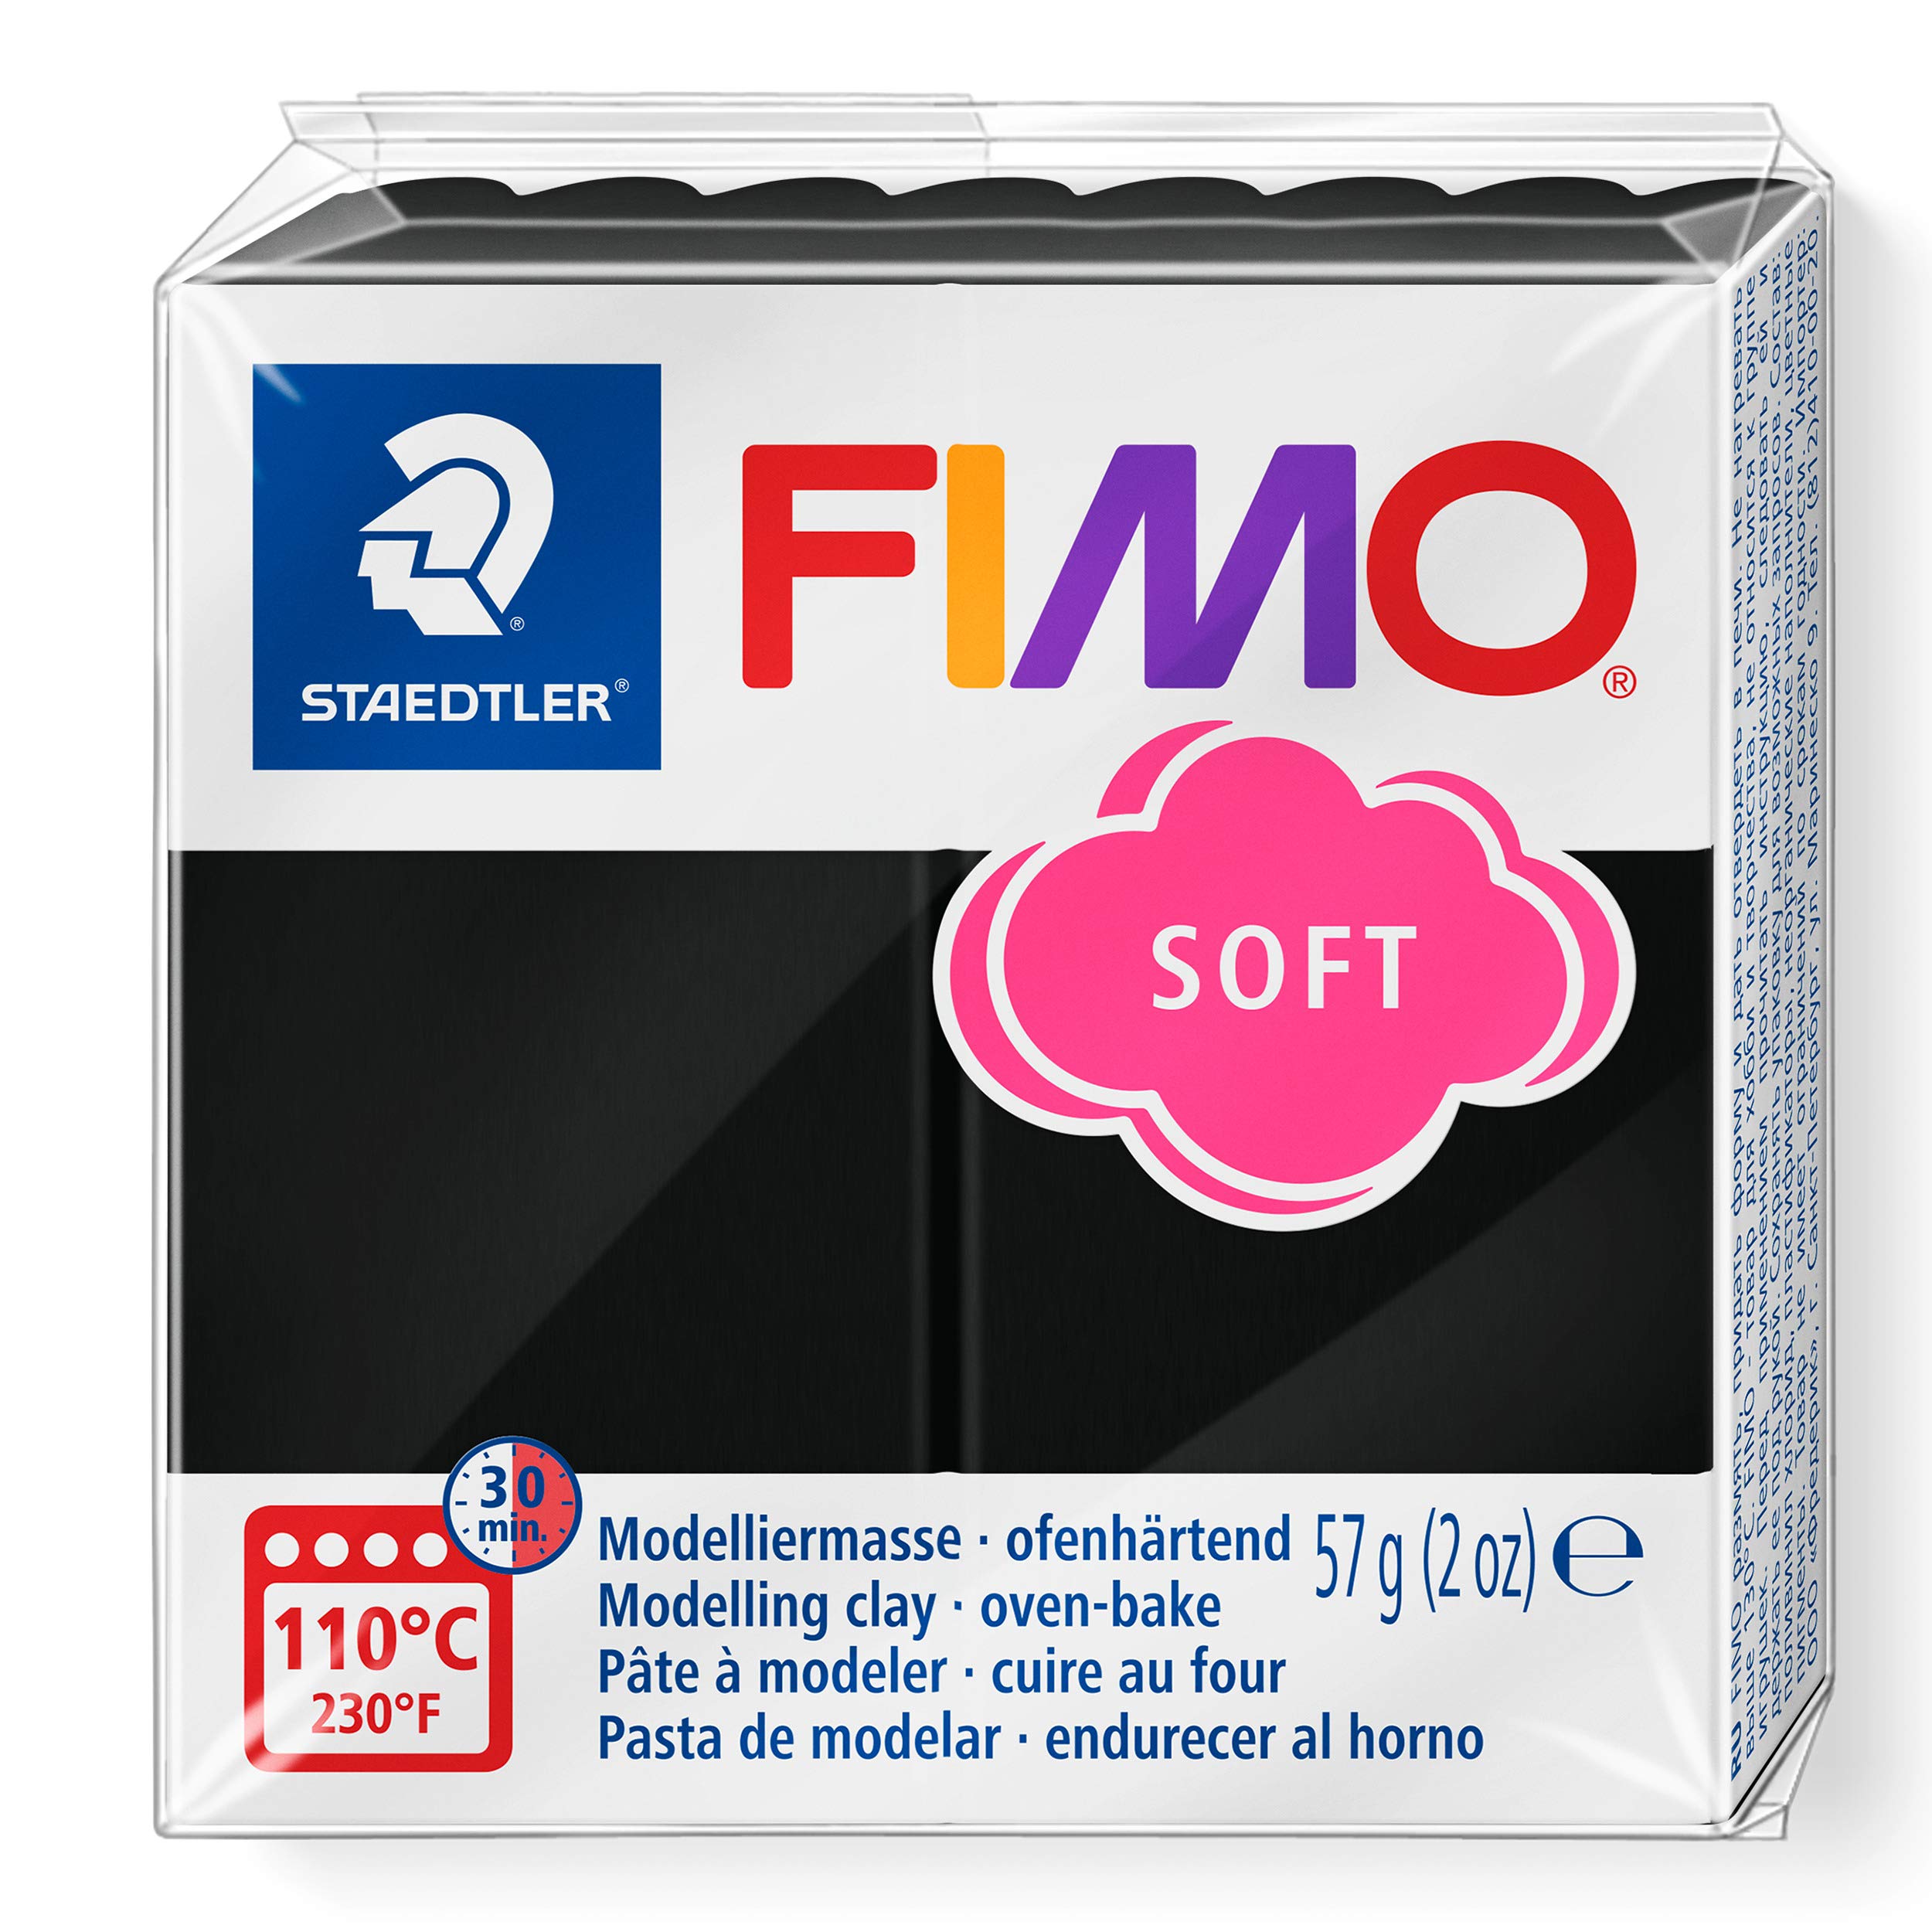 Staedtler FIMO Soft Polymer clay - -Oven Bake clay for Jewelry